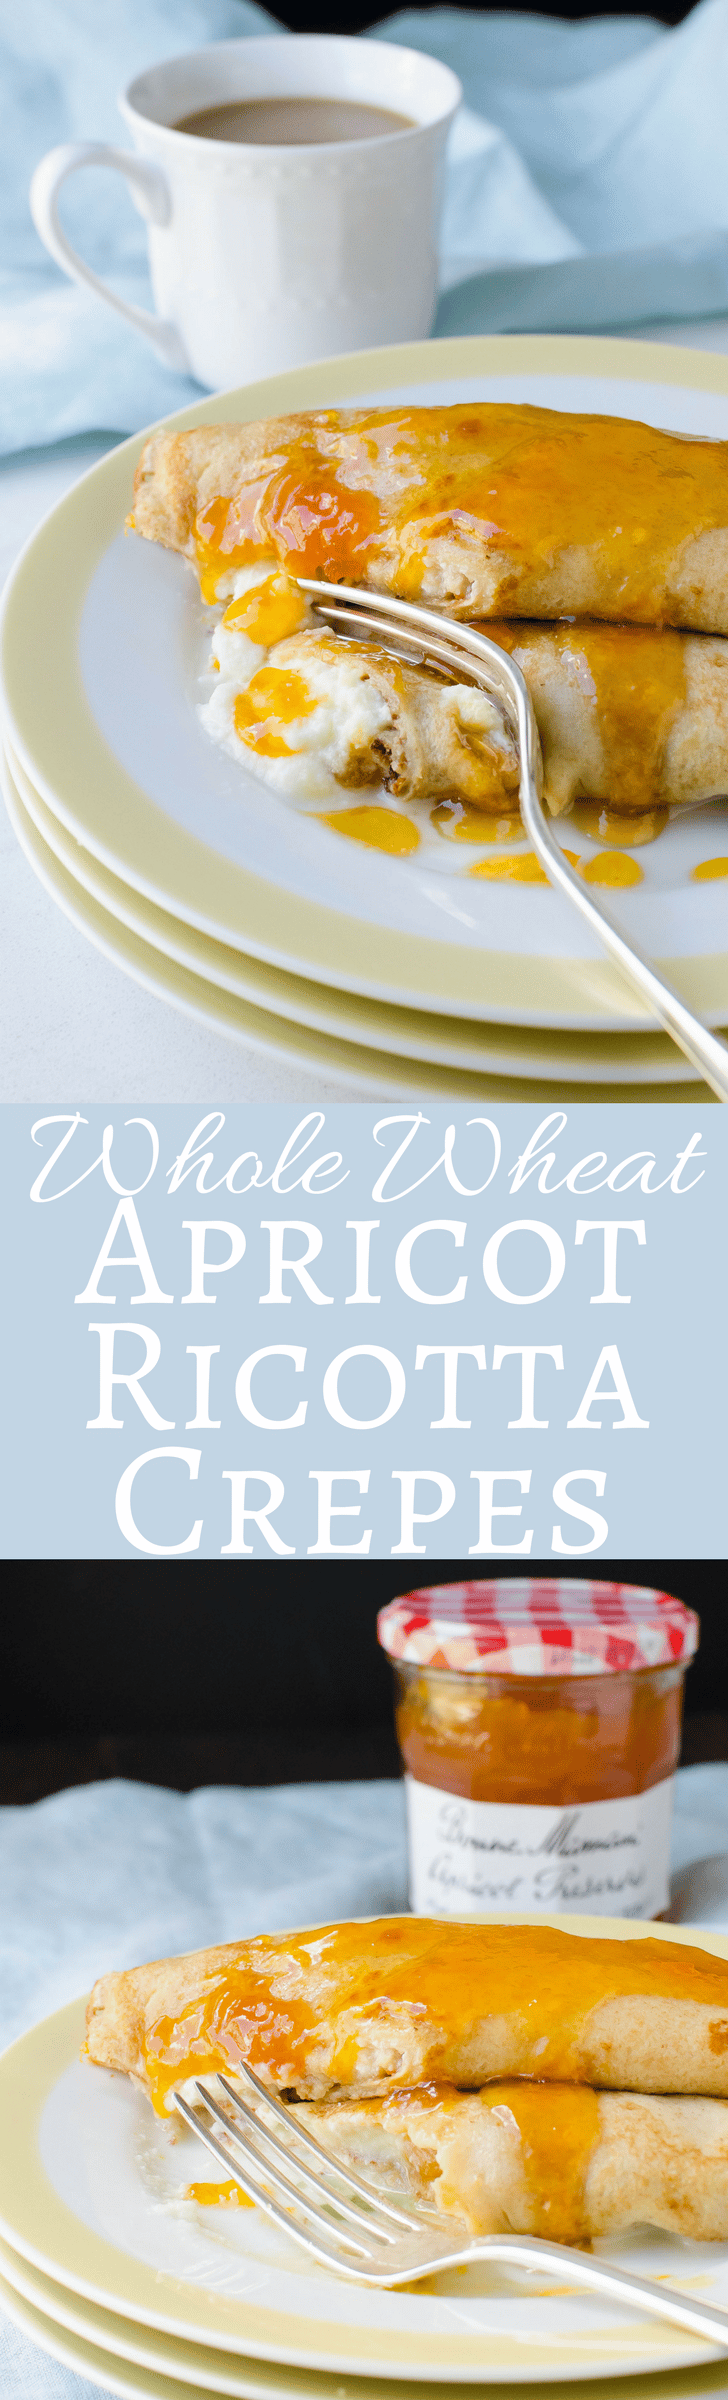 This easy make-ahead recipe for whole wheat apricot ricotta crepes uses Bonne Maman apricot preserves and cognac for a delicious dish!